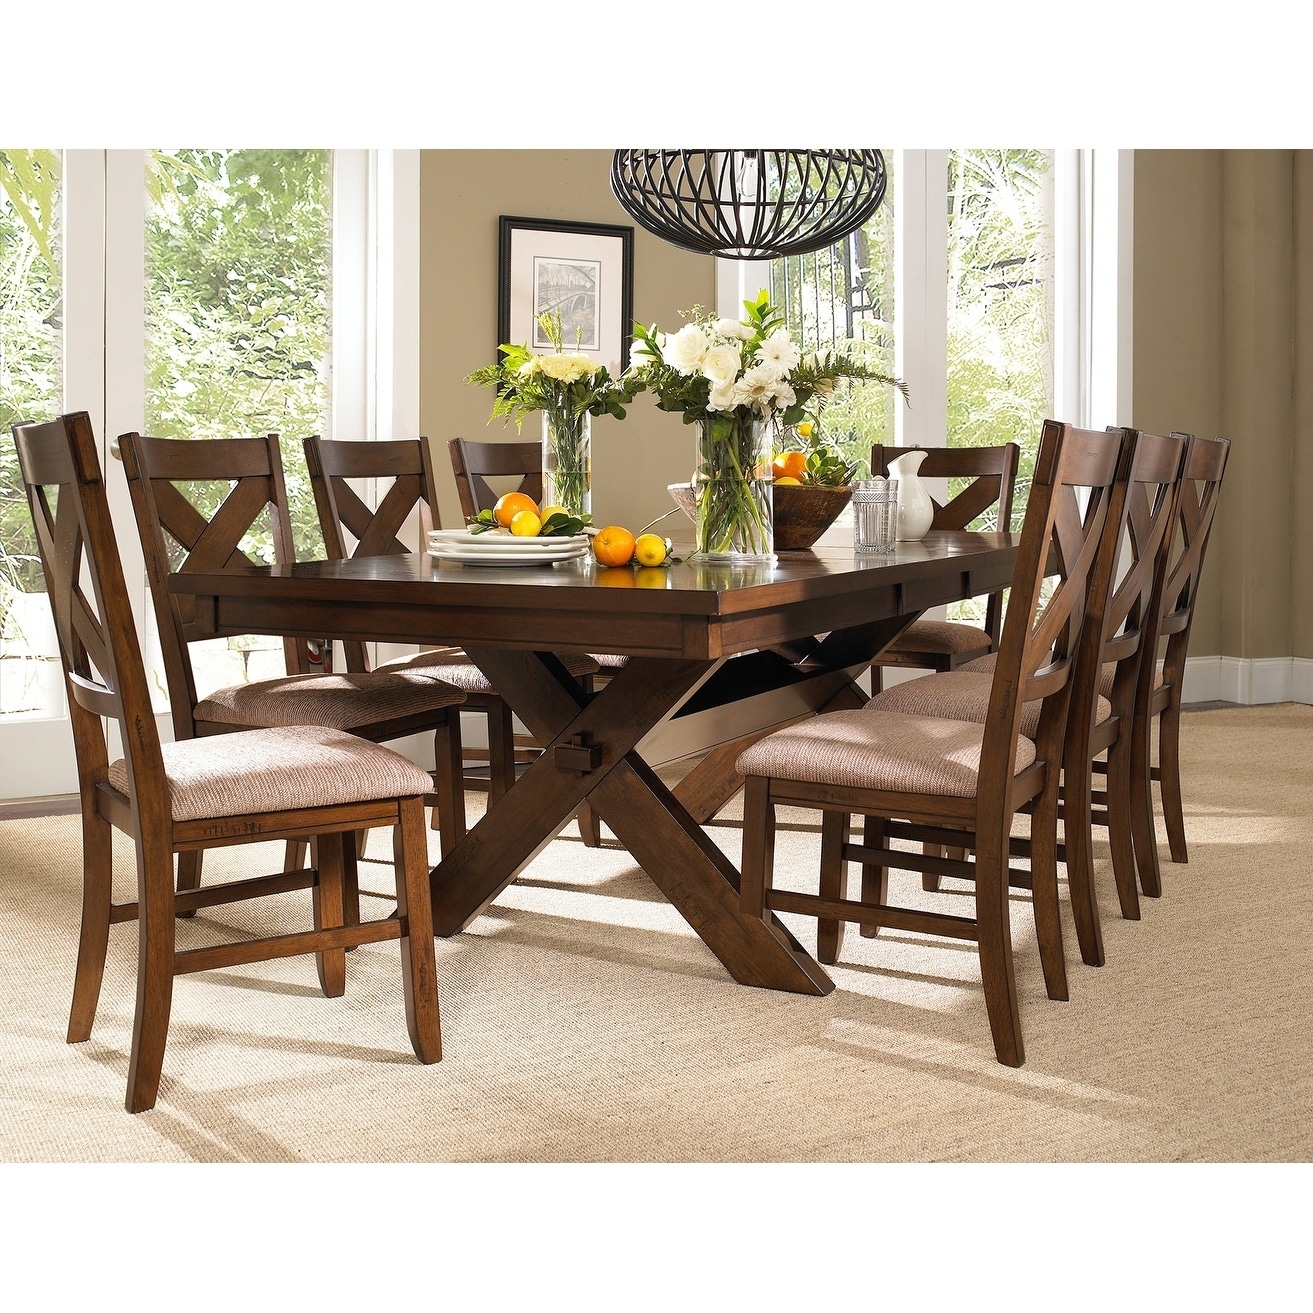 8 Seat Dining Table Set